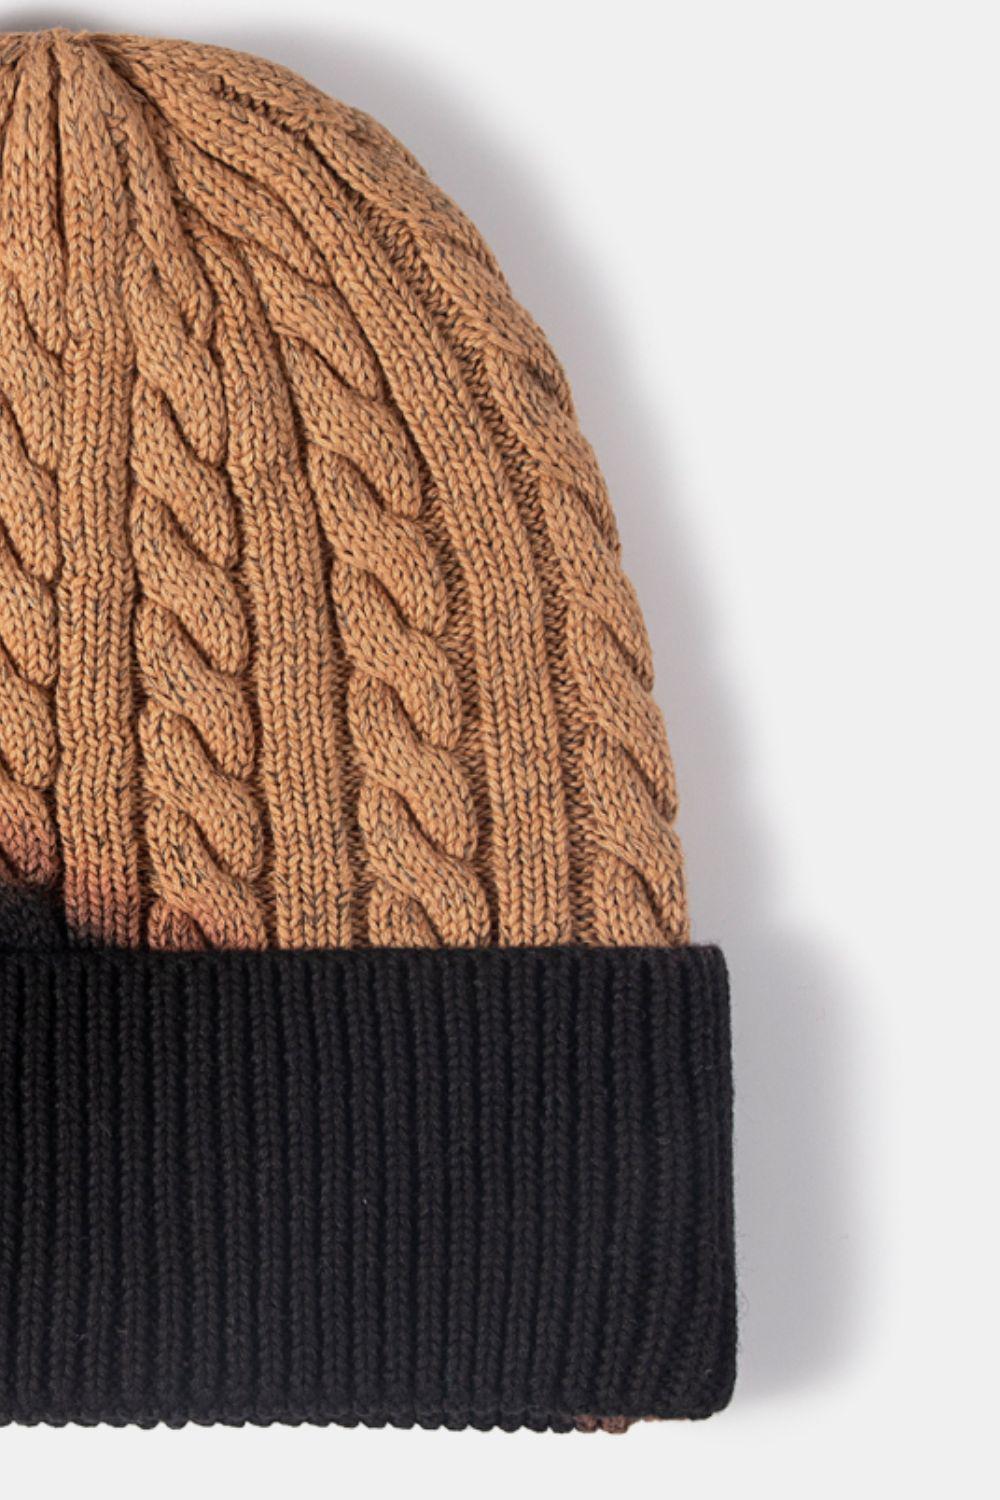 Contrast Tie-Dye Cable-Knit Cuffed Beanie BLUE ZONE PLANET